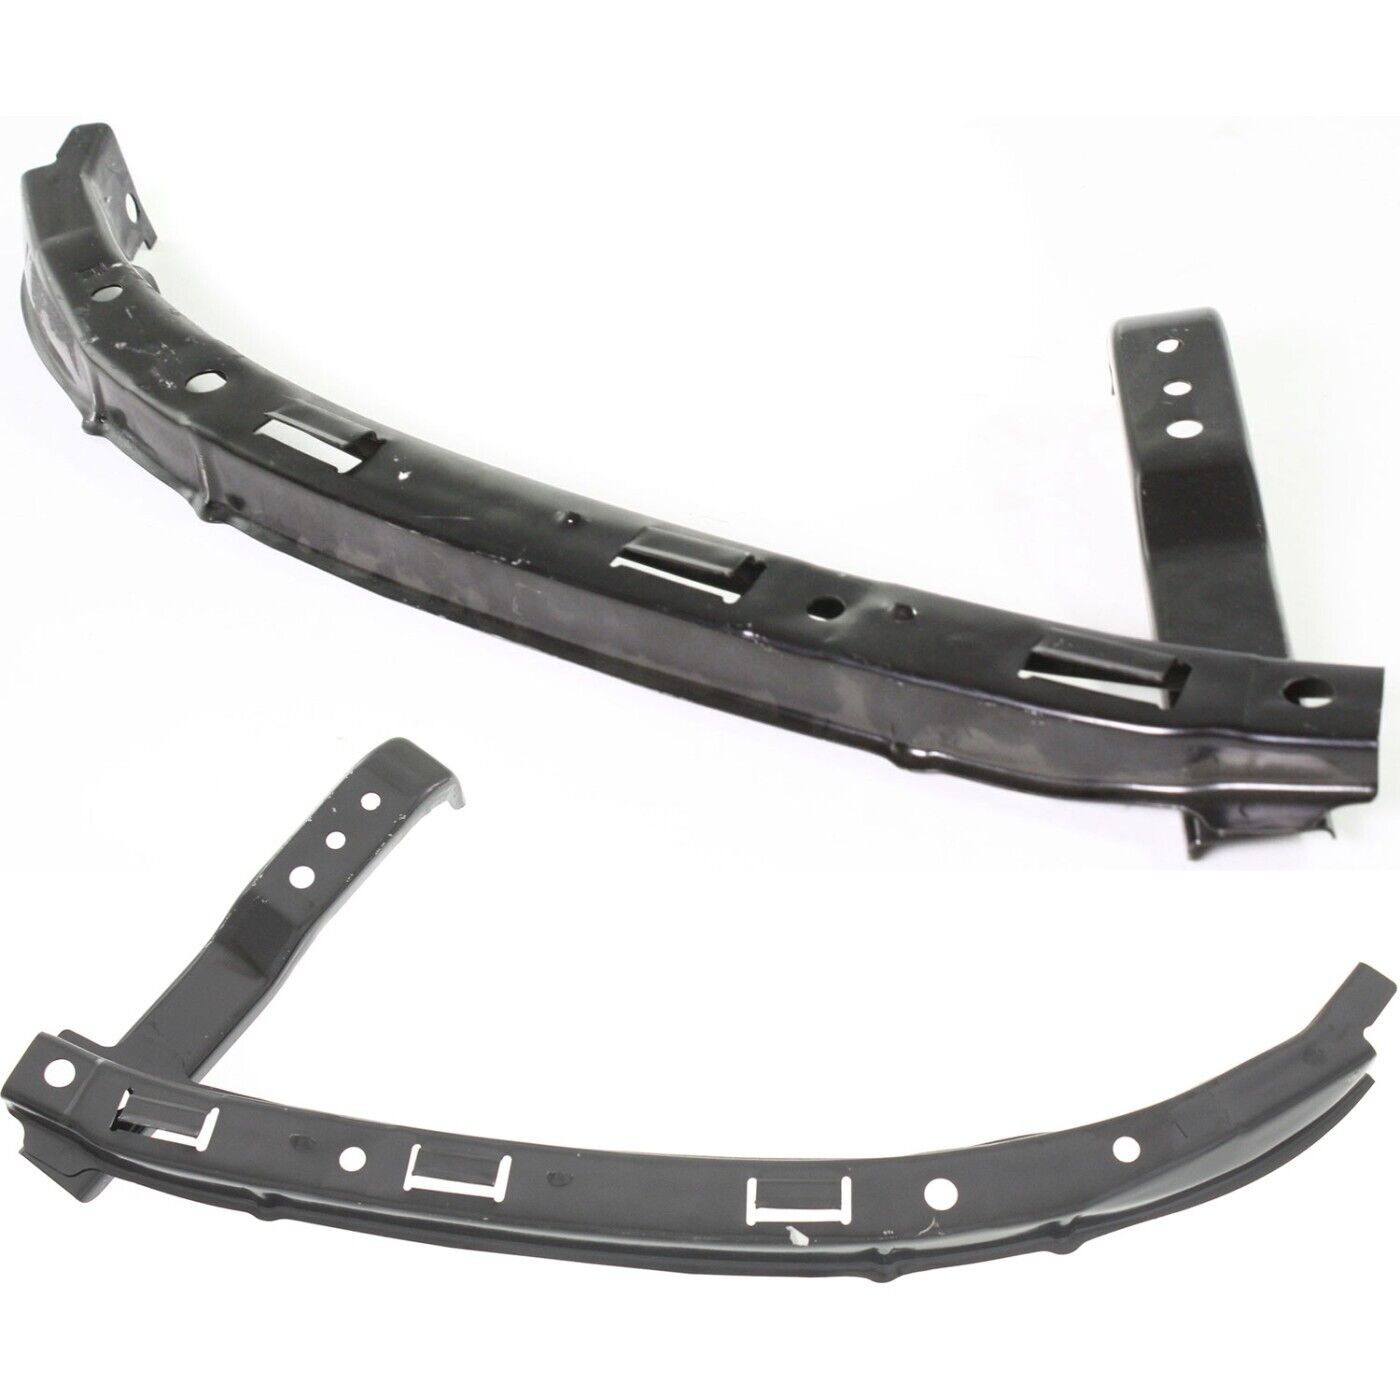 Bumper Bracket For 2005-2006 Acura RSX Set of 2 Front, Driver and Passenger Side